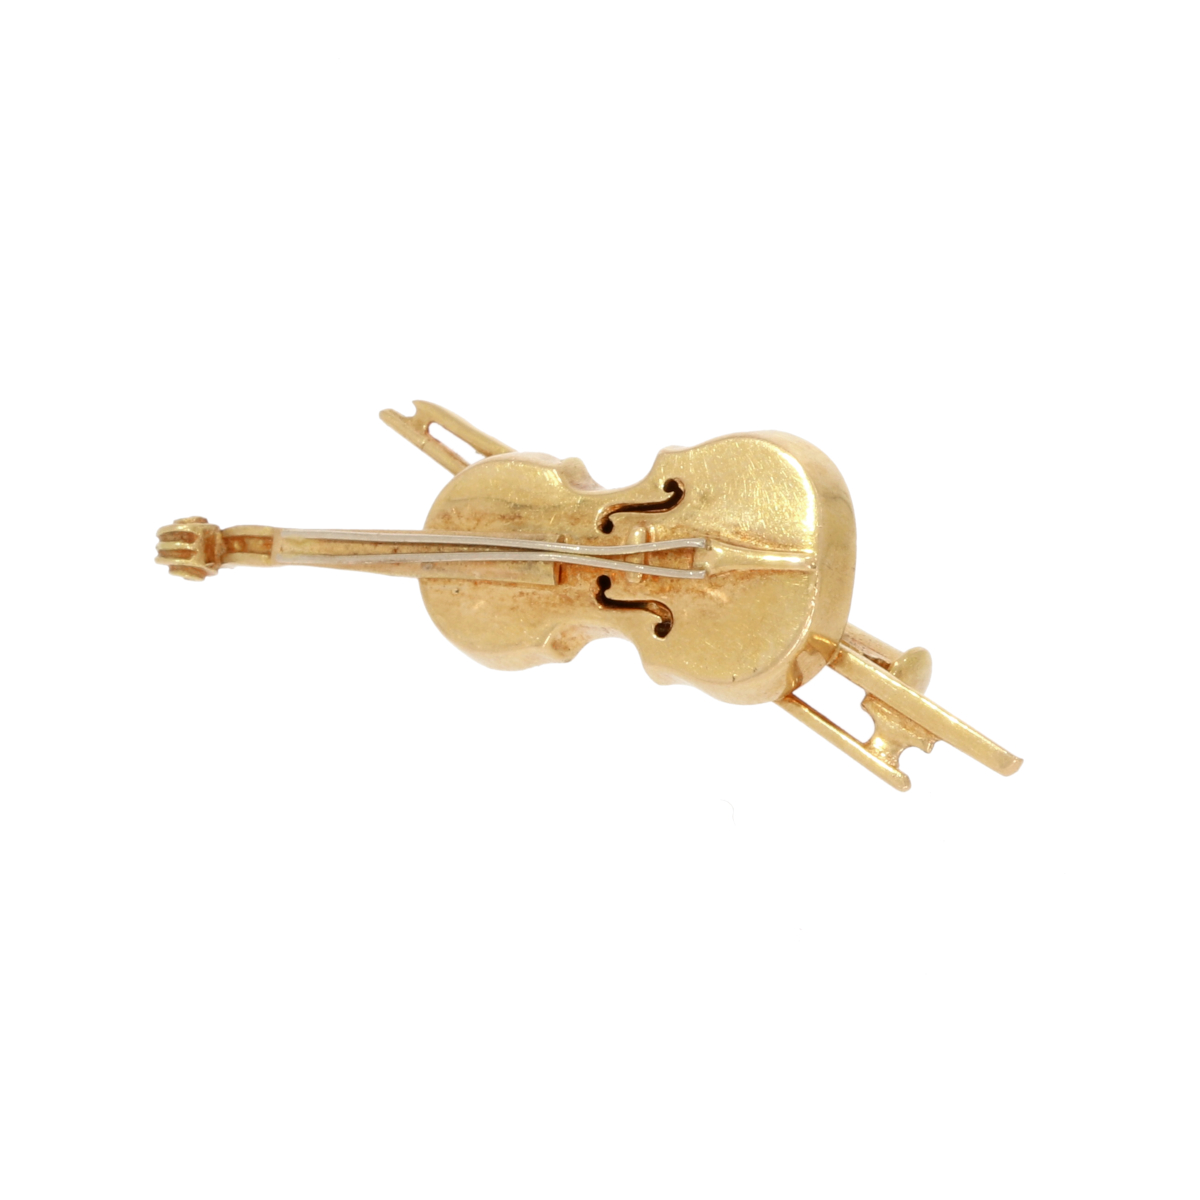 Brooch in the form of a violin